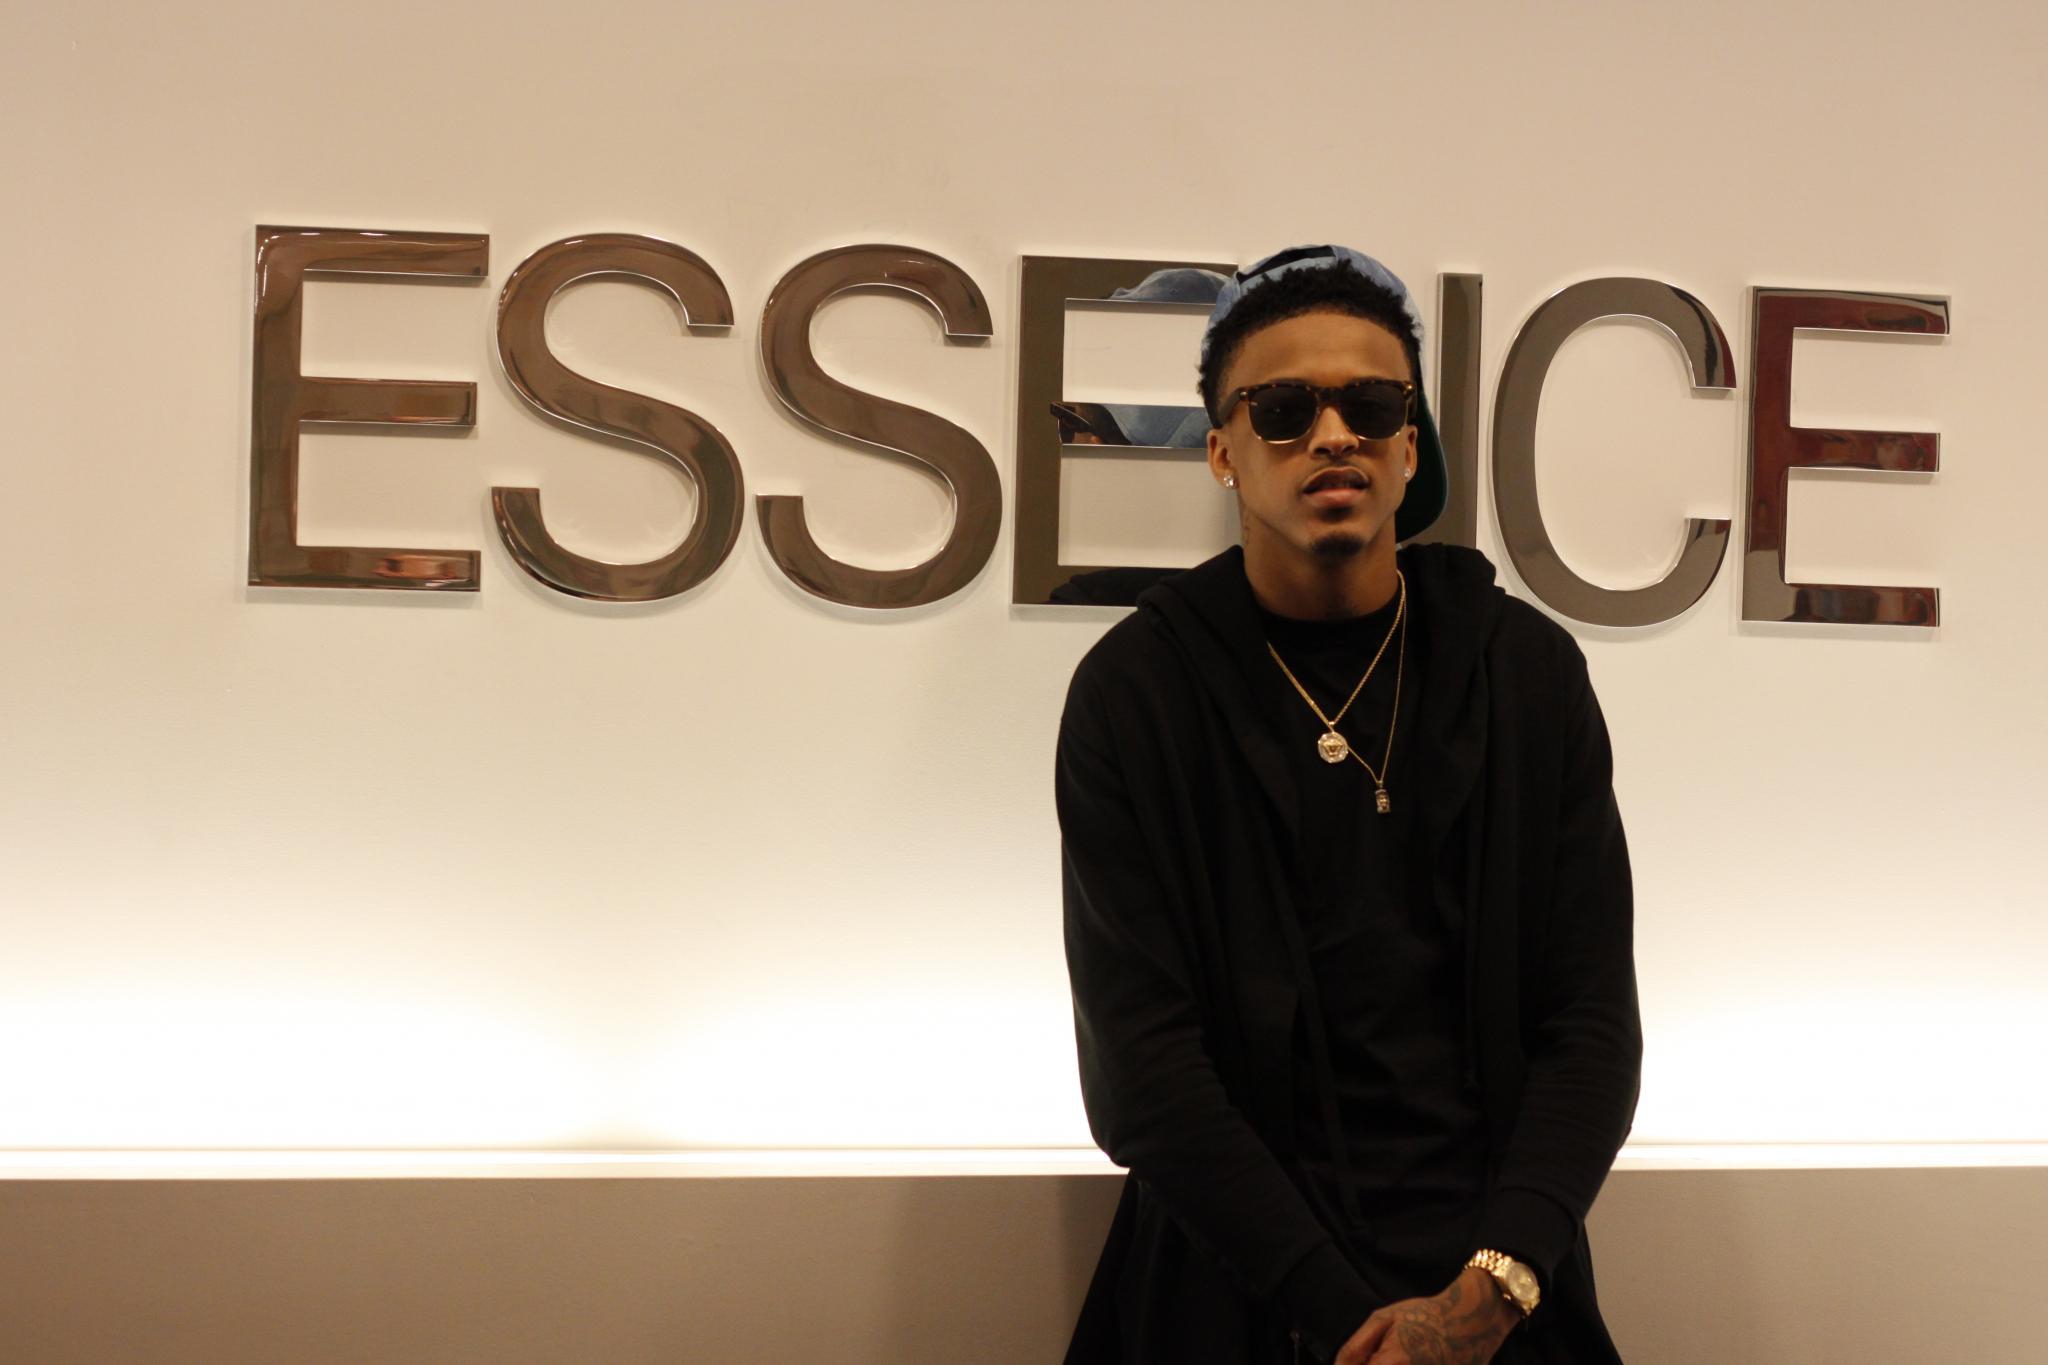 August Alsina Wallpapers Images Photos Pictures Backgrounds